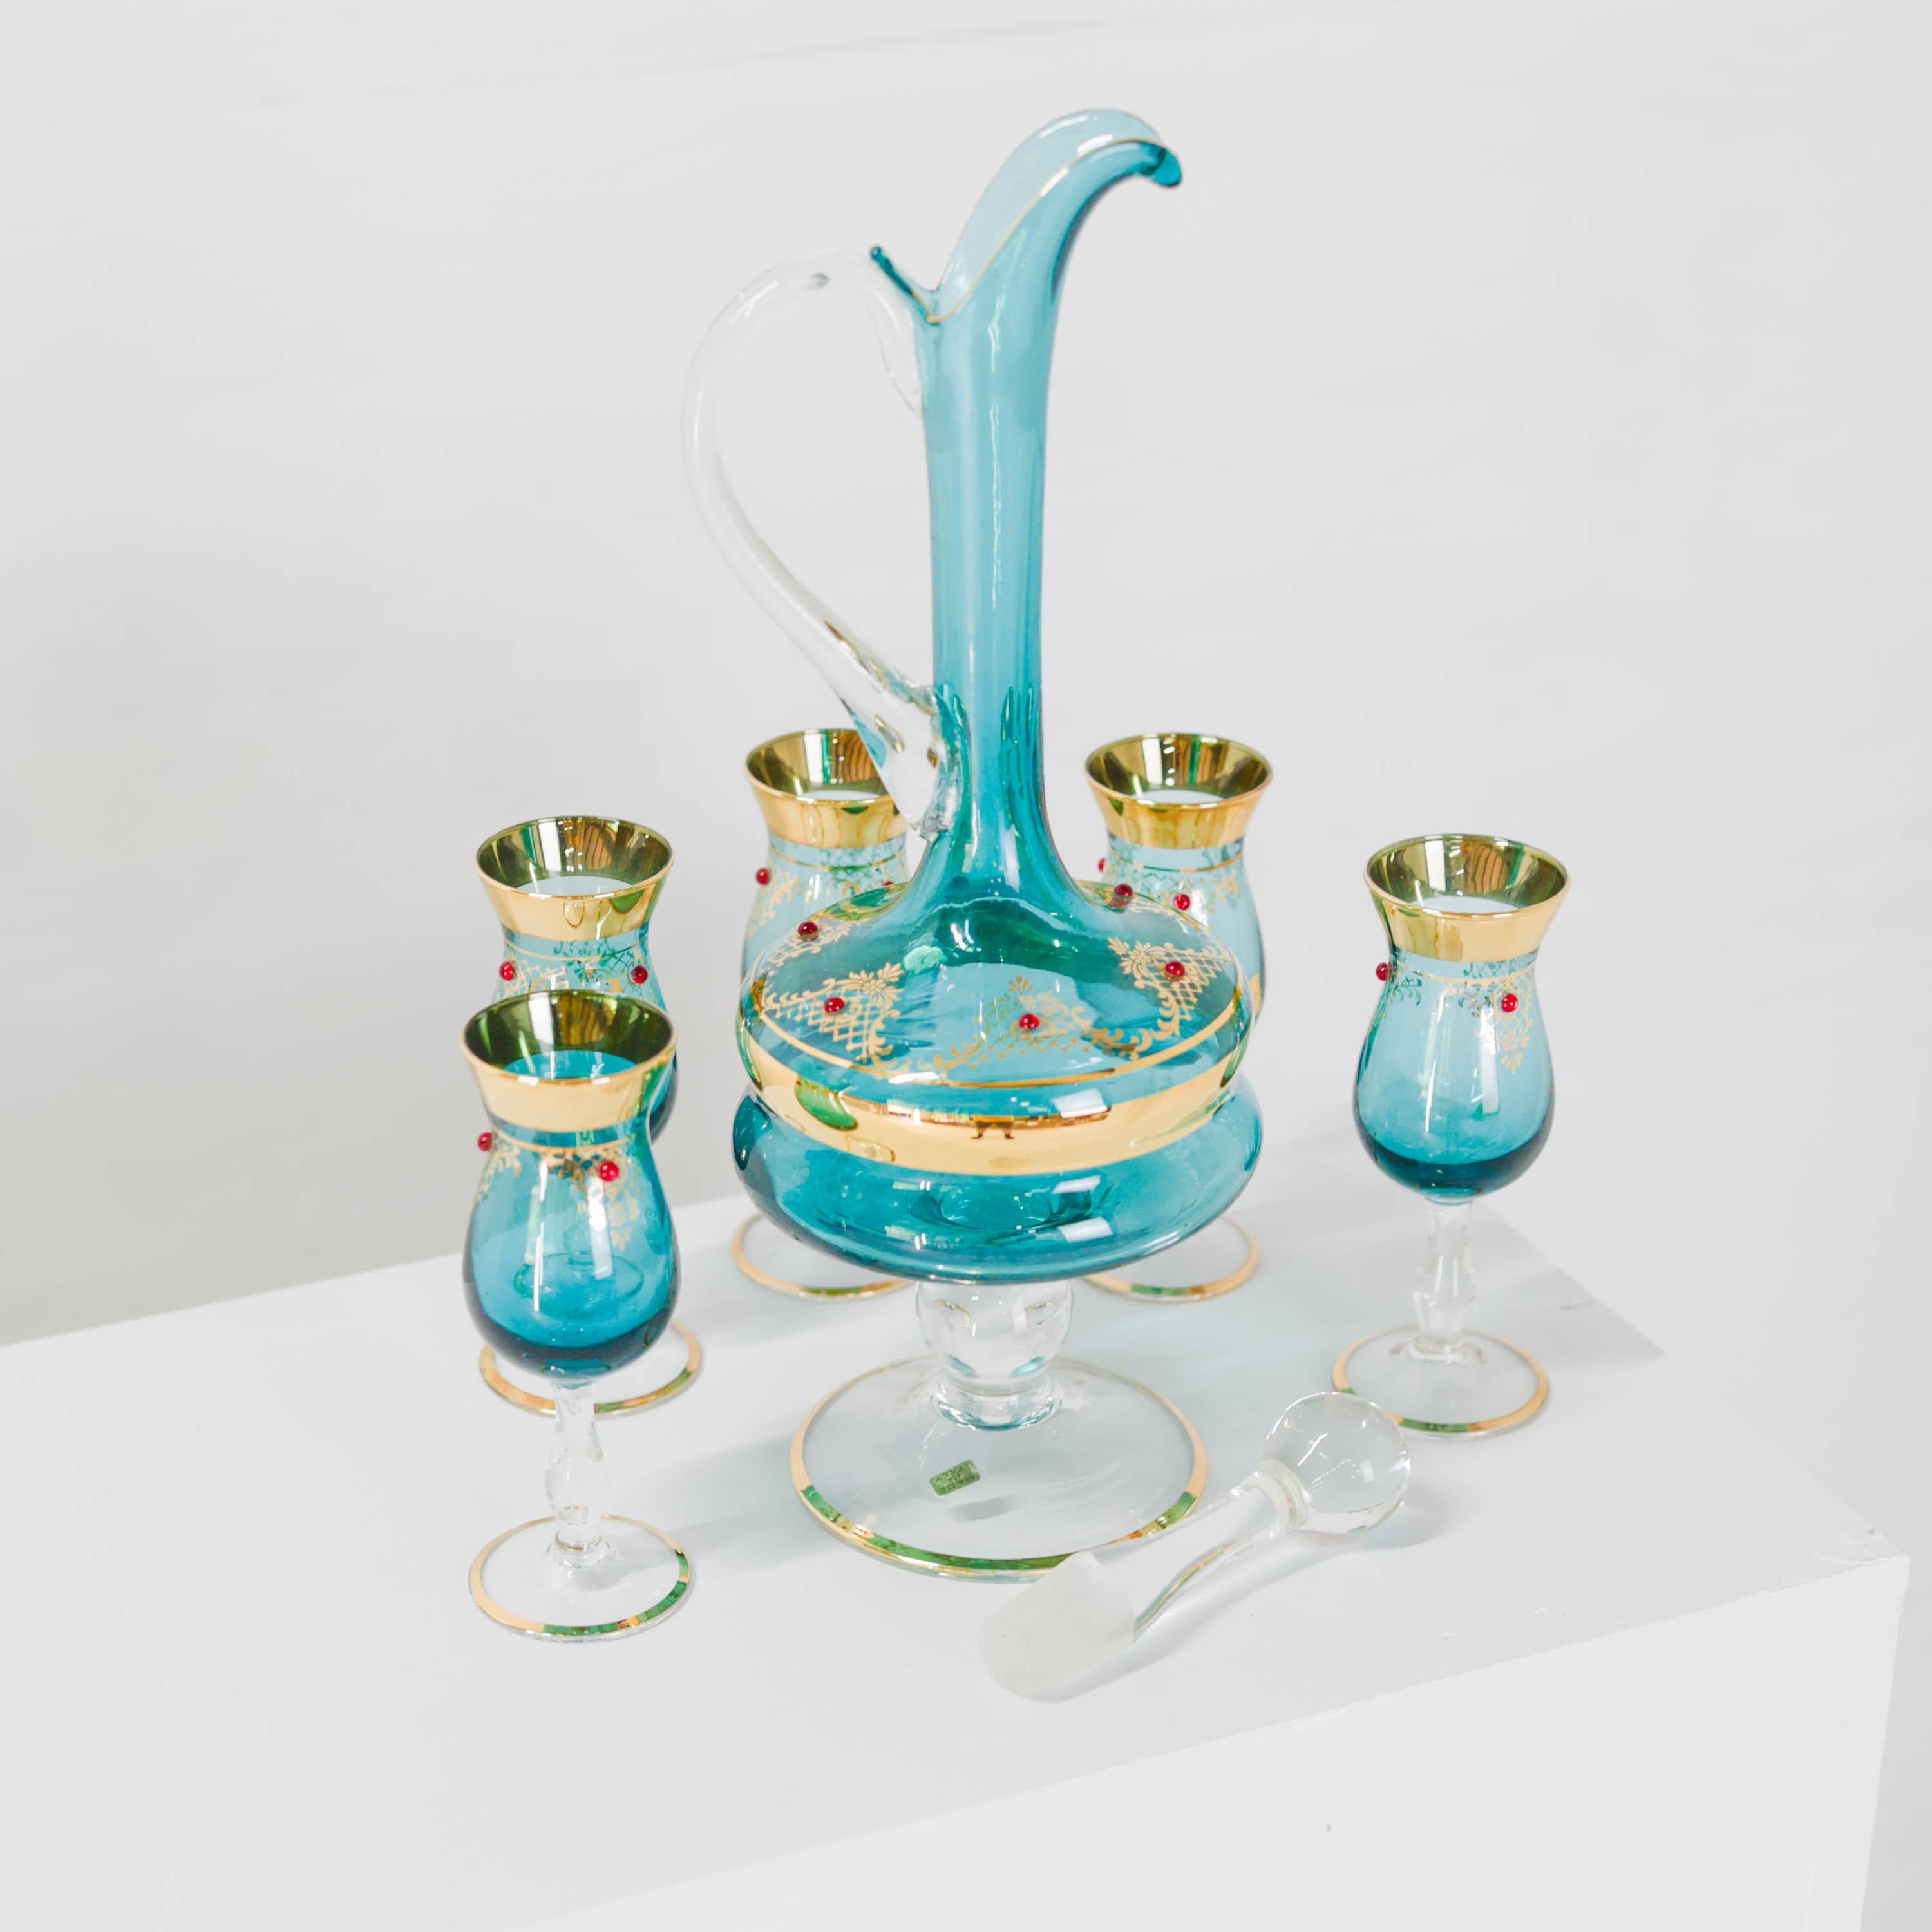 This never-used Midcentury (circa 1960s) handblown Venetian glass decanter and five cordial glass set is a maximalist's dream.

The azure blue glass decanter has been gilded in 22k yellow gold around the belly of the decanter, along the elegantly